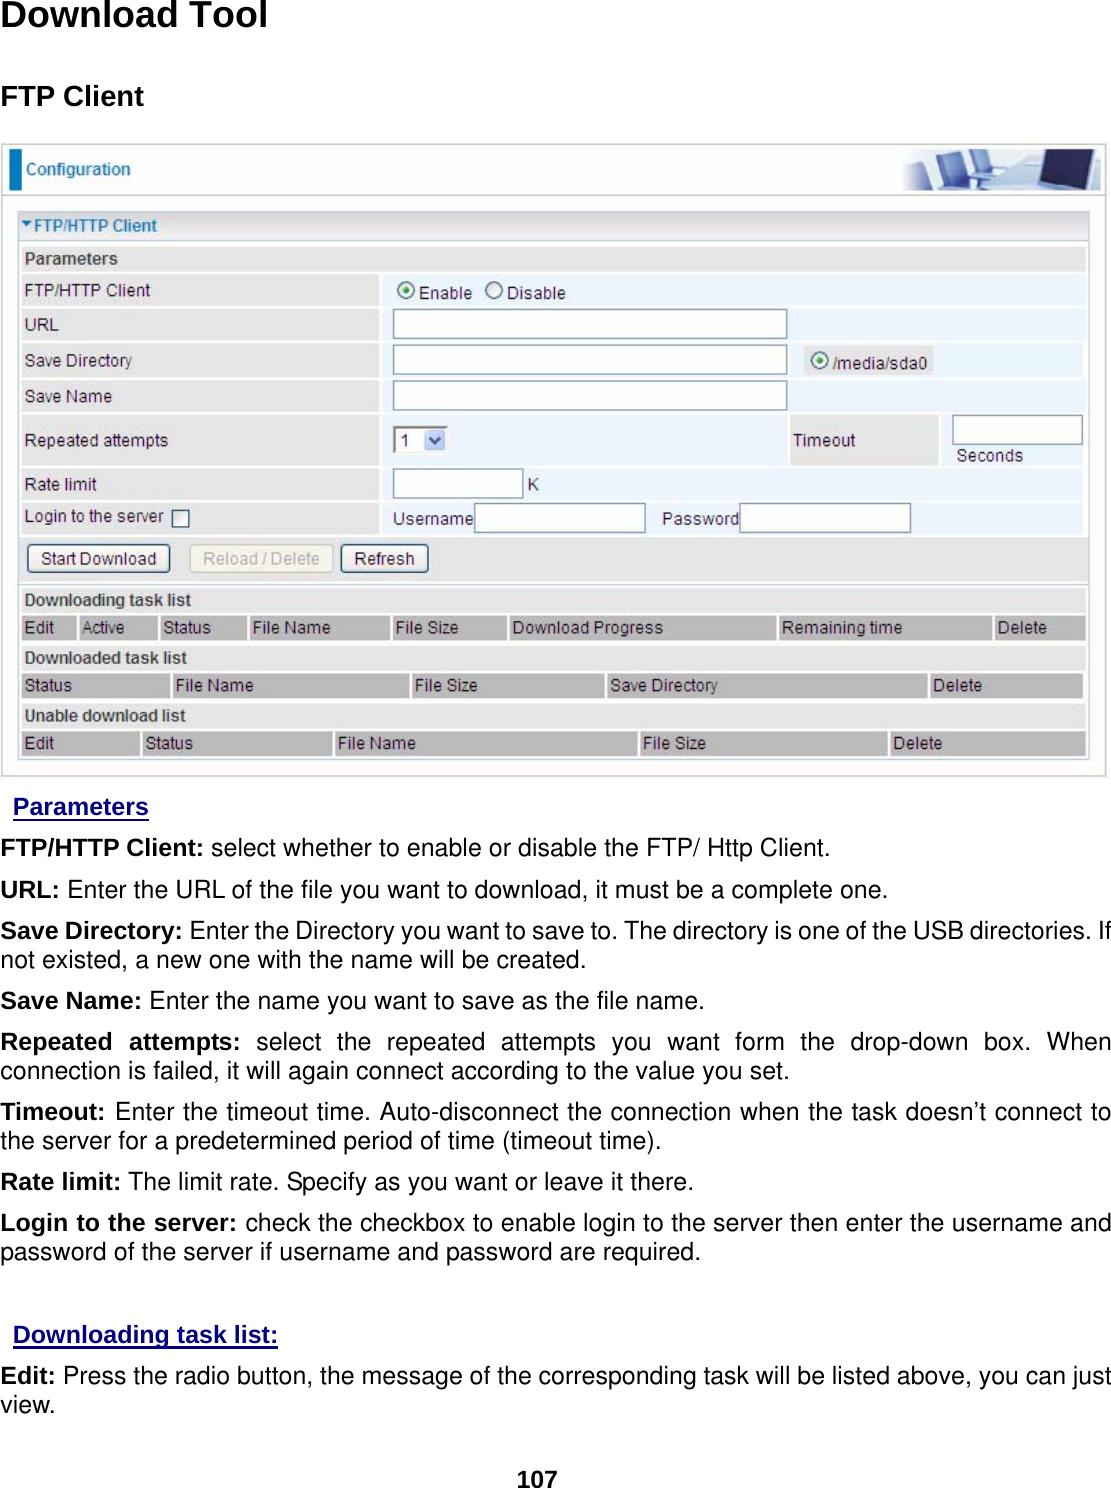  107 Download Tool  FTP Client   Parameters FTP/HTTP Client: select whether to enable or disable the FTP/ Http Client. URL: Enter the URL of the file you want to download, it must be a complete one. Save Directory: Enter the Directory you want to save to. The directory is one of the USB directories. If not existed, a new one with the name will be created. Save Name: Enter the name you want to save as the file name. Repeated attempts: select the repeated attempts you want form the drop-down box. When connection is failed, it will again connect according to the value you set. Timeout: Enter the timeout time. Auto-disconnect the connection when the task doesn’t connect to the server for a predetermined period of time (timeout time). Rate limit: The limit rate. Specify as you want or leave it there.  Login to the server: check the checkbox to enable login to the server then enter the username and password of the server if username and password are required.   Downloading task list:  Edit: Press the radio button, the message of the corresponding task will be listed above, you can just view. 